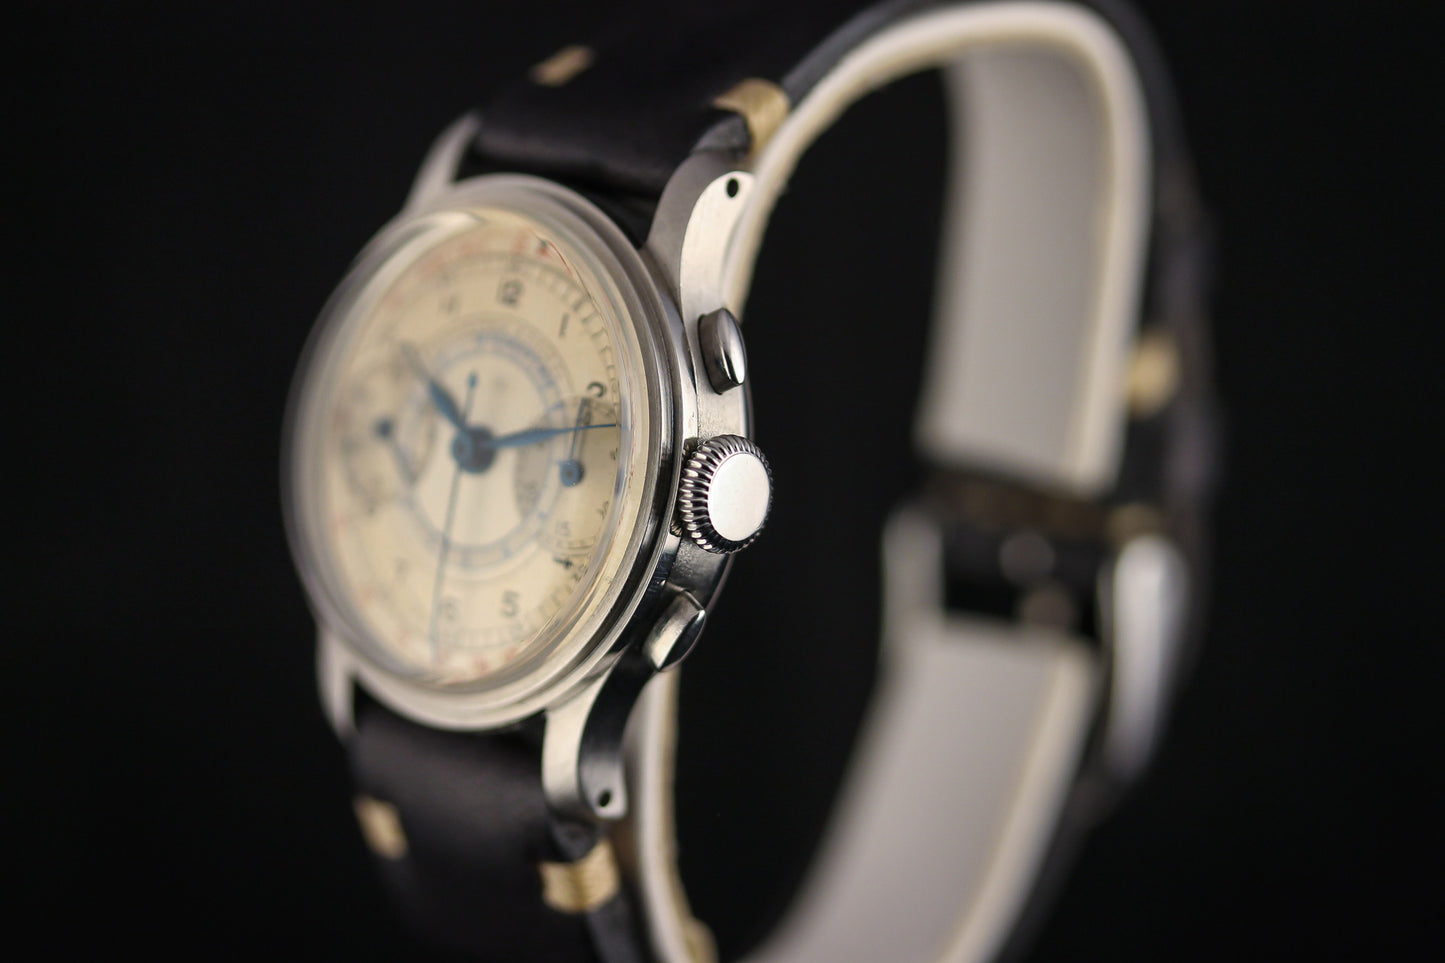 Abercrombie & Fitch Chronograph Steel - 1940s